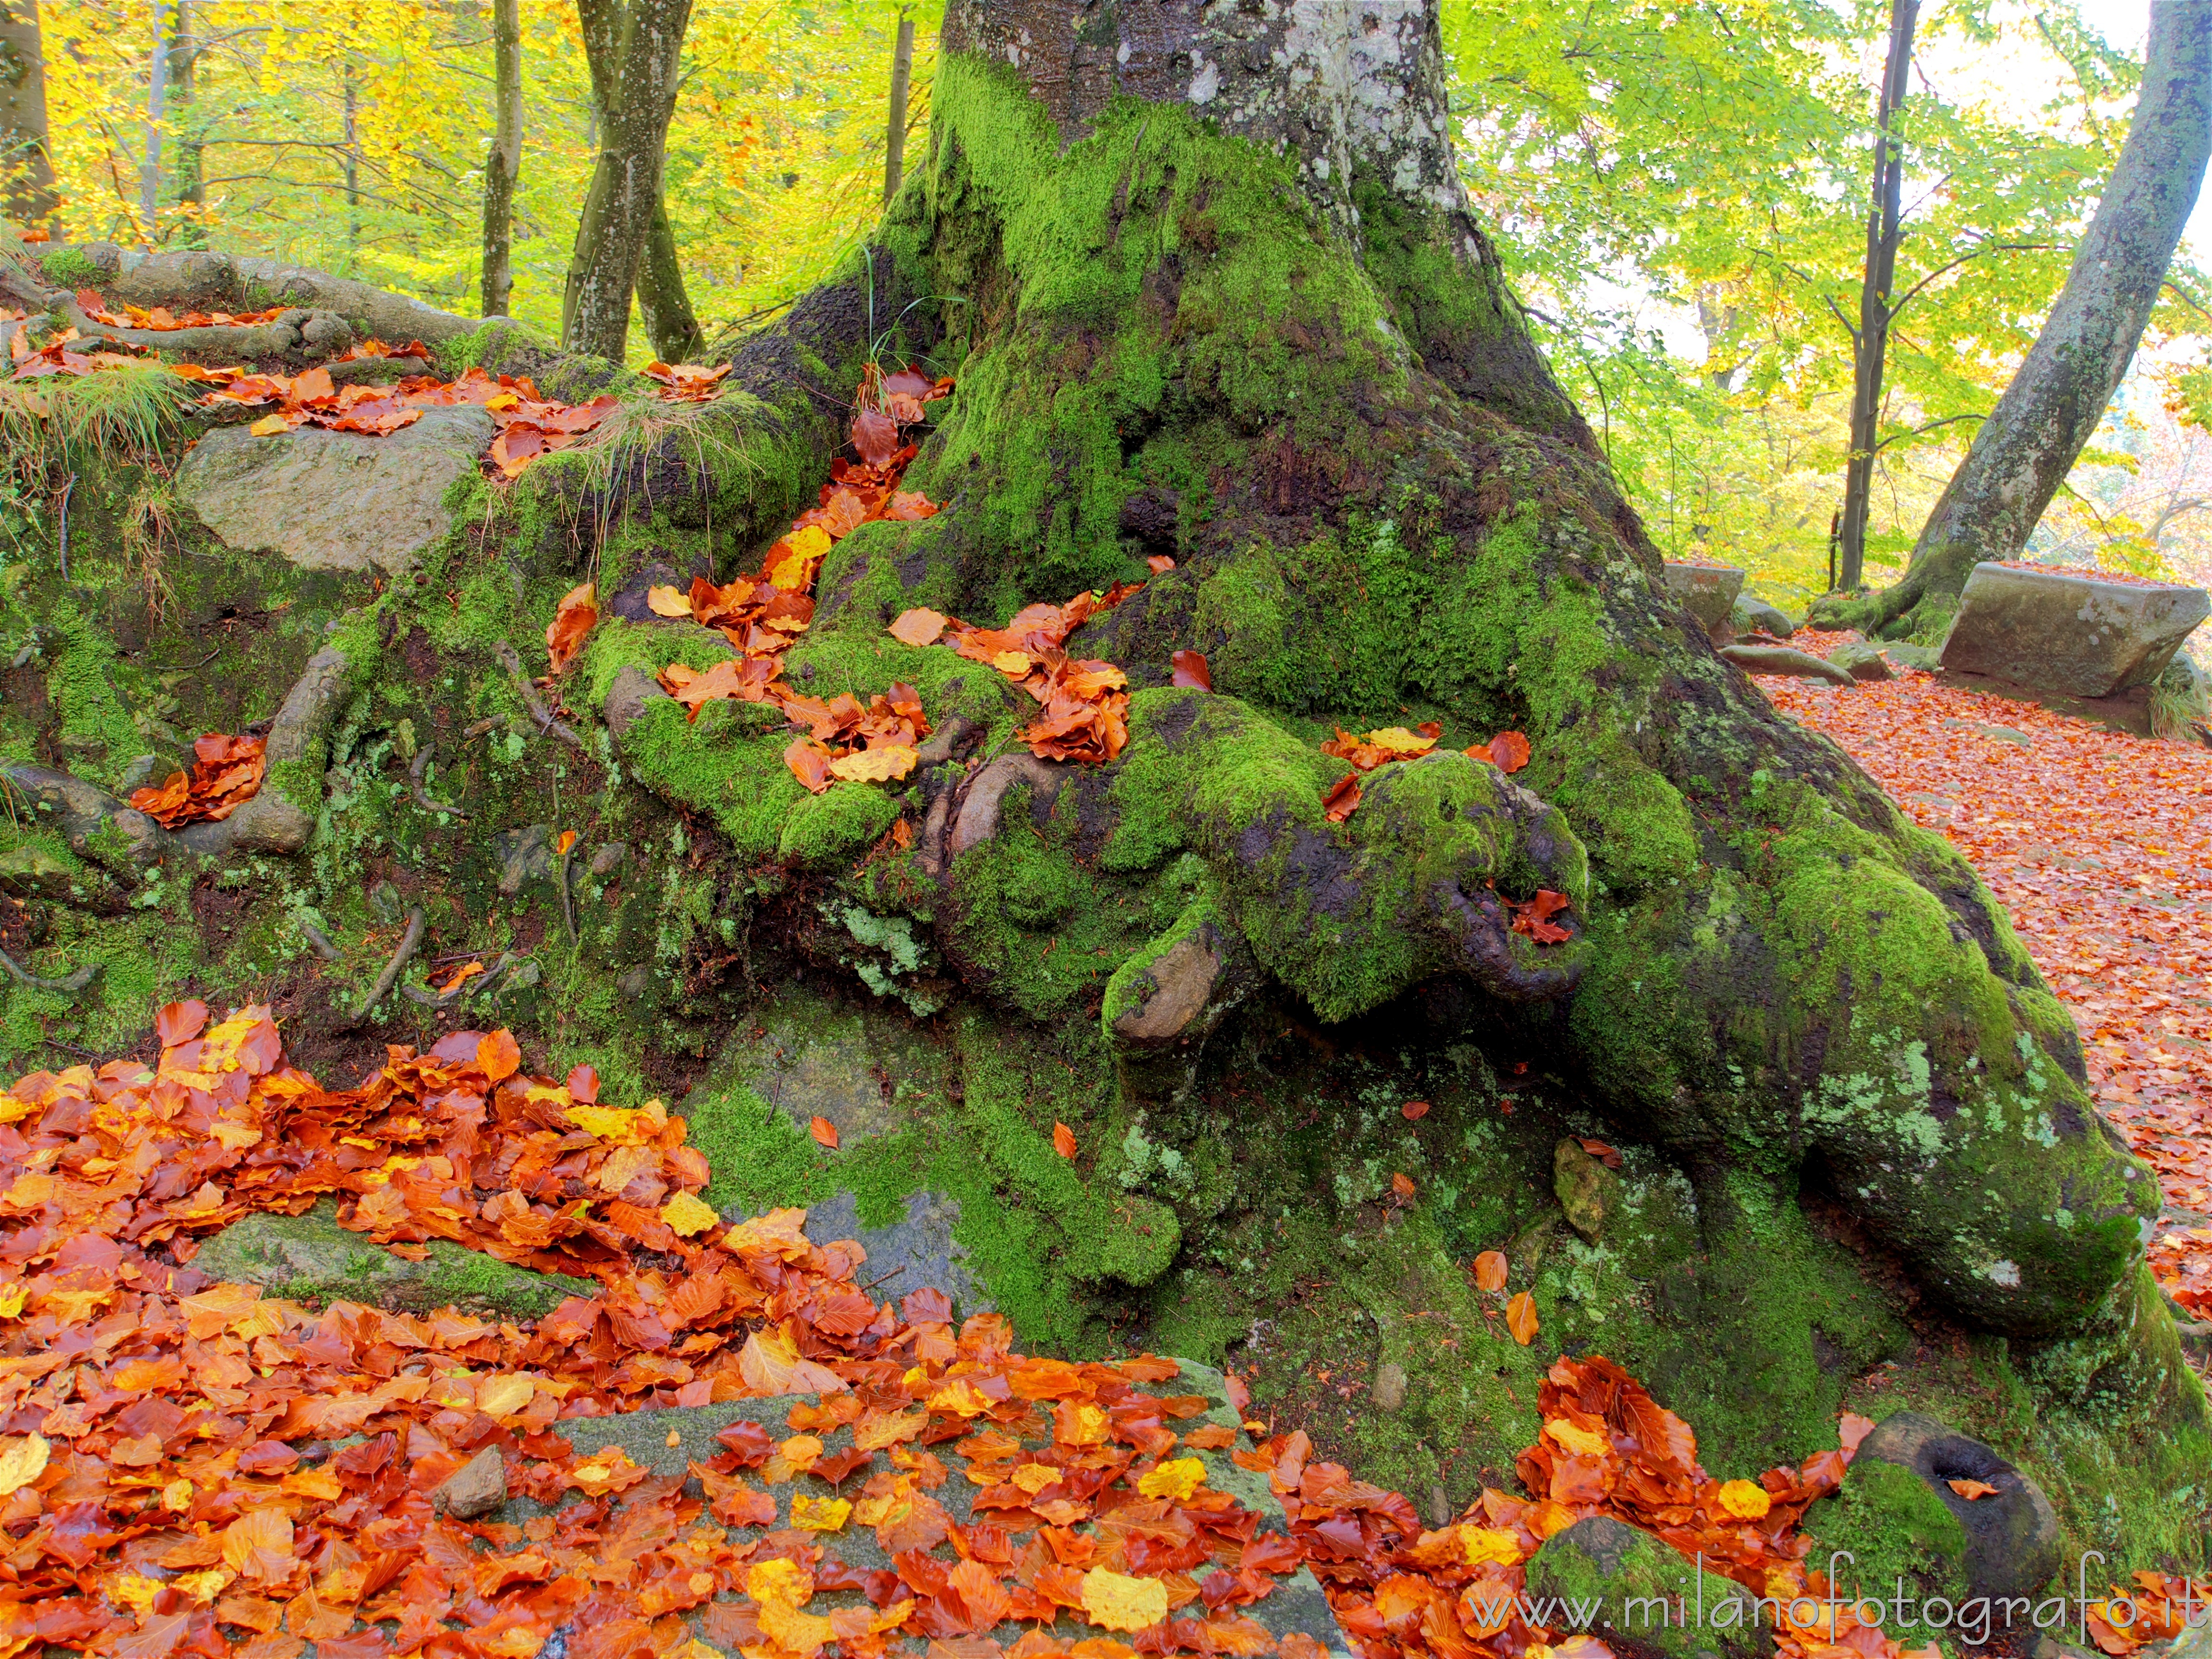 Biella, Italy: Moss-covered base of a trunk in autumn in the woods around the Sanctuary of Oropa - Biella, Italy